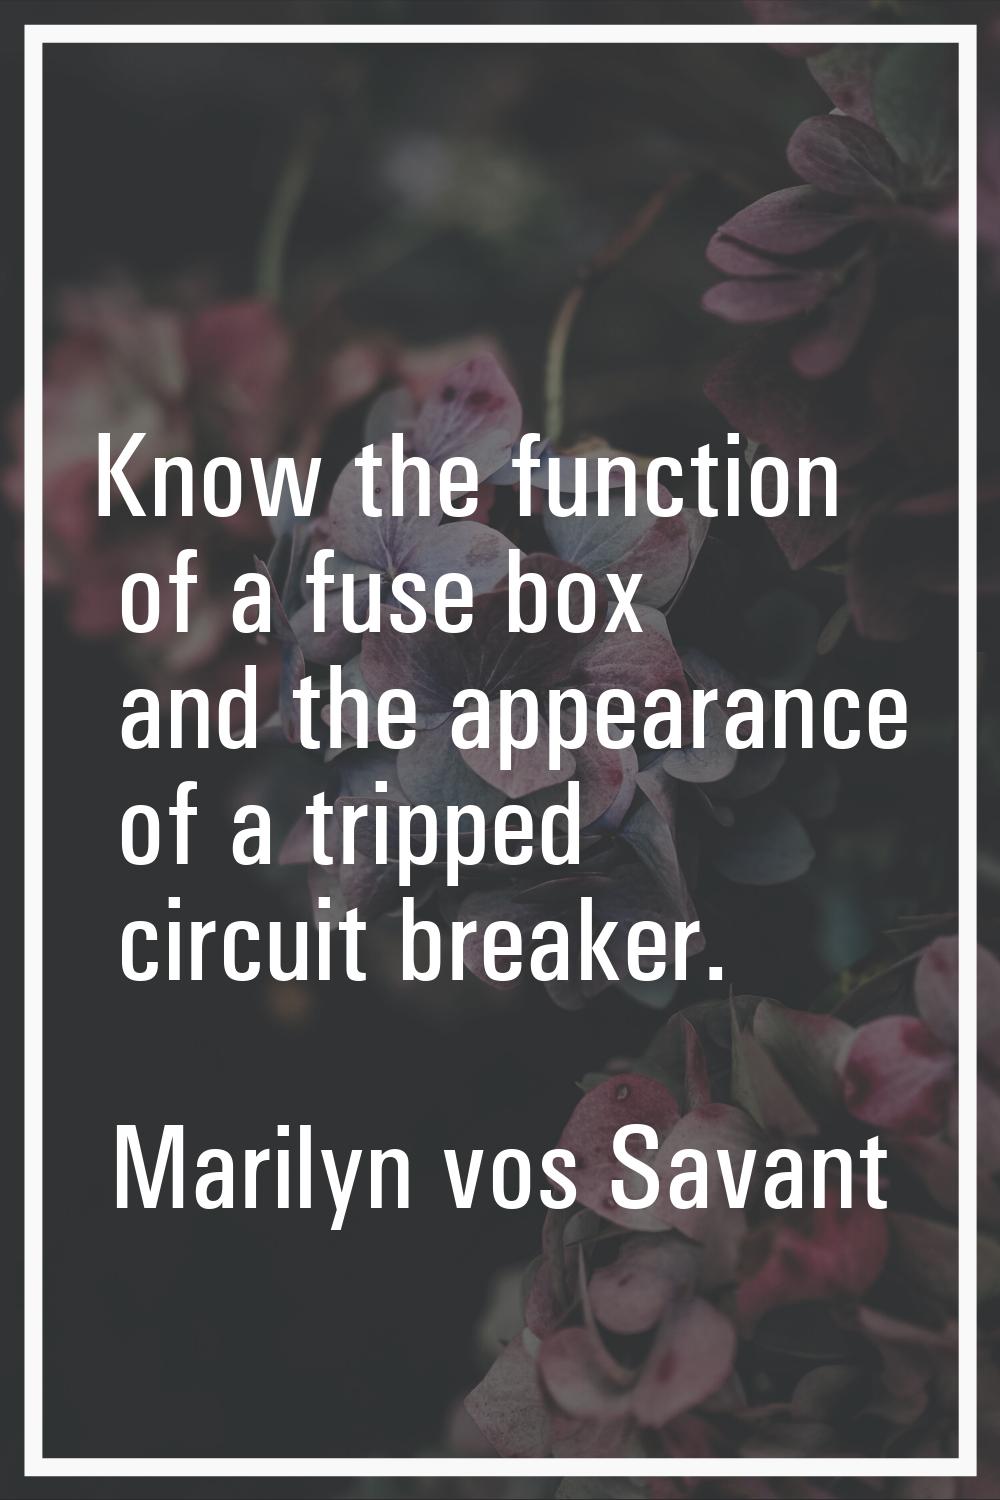 Know the function of a fuse box and the appearance of a tripped circuit breaker.